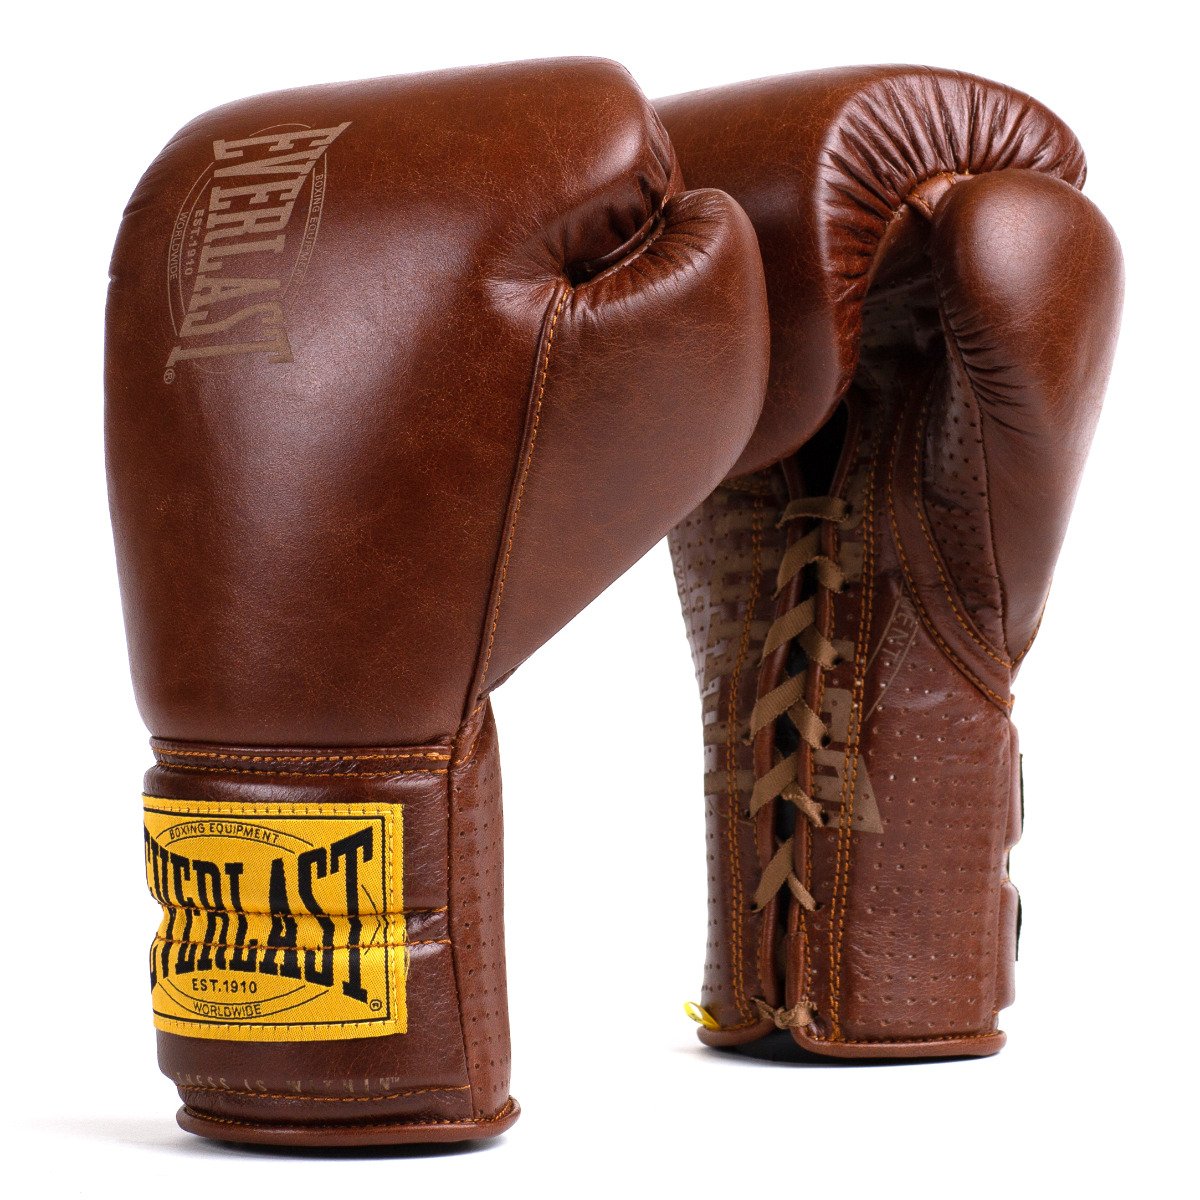 1910 Brown Laced Sparring Gloves | Everlast